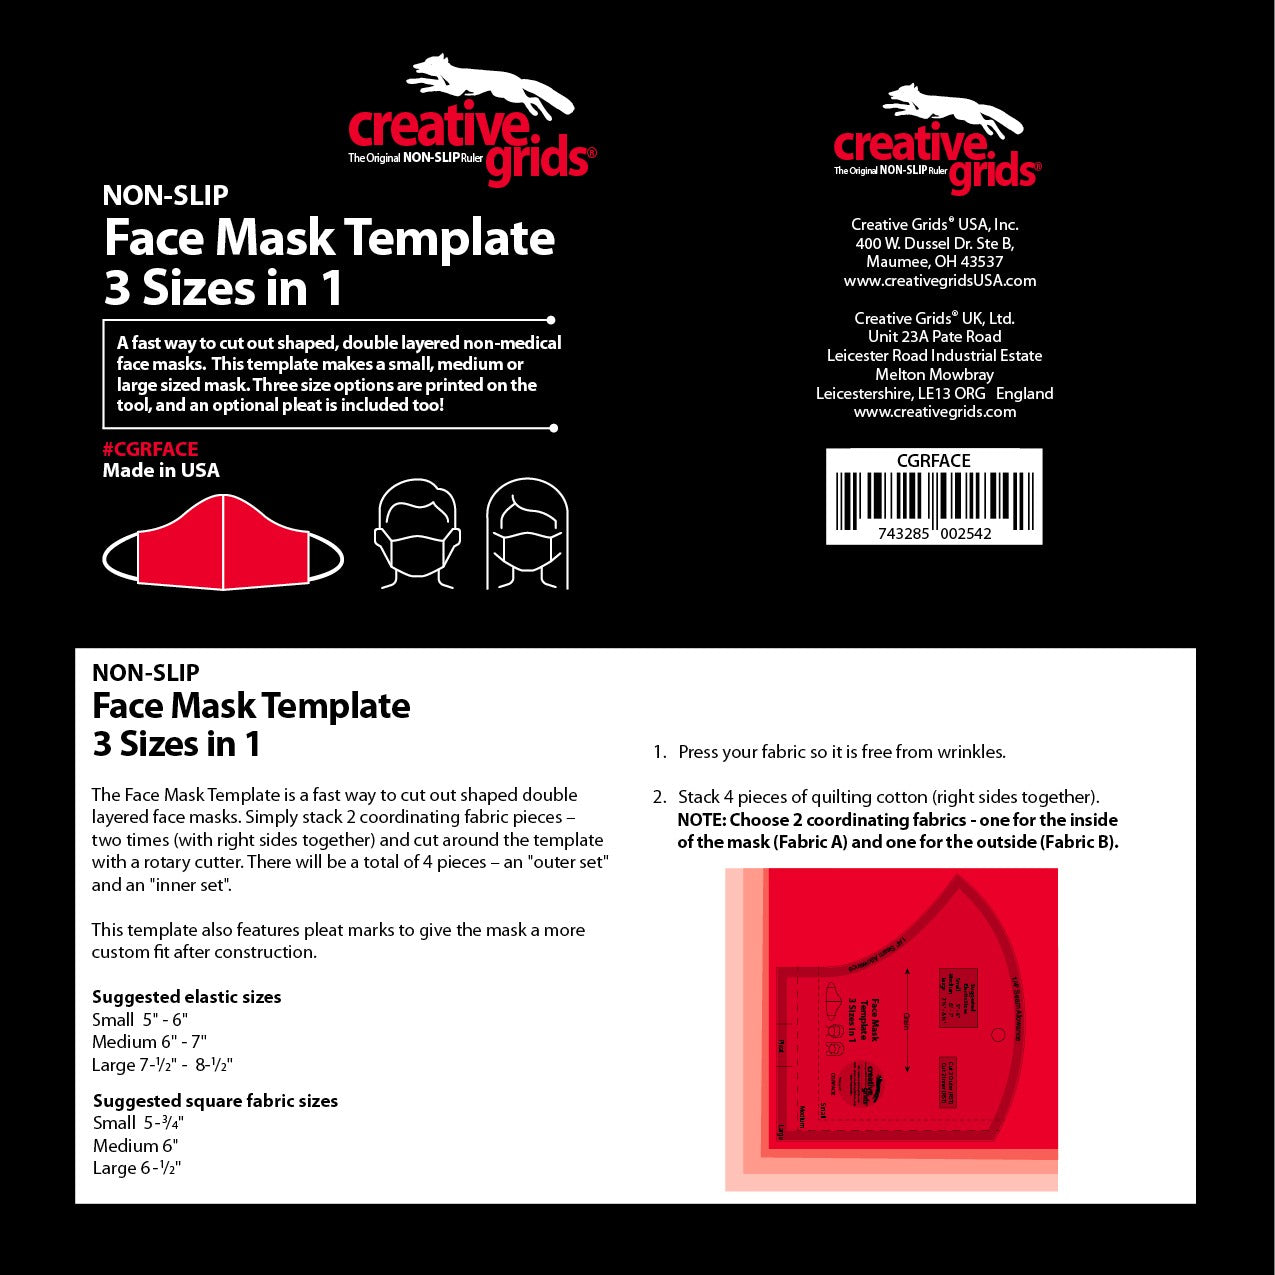 Creative Grids Face Mask Template Makes 3 Sizes 6-Inch x 6-1/4-Inch (CGRFACE)